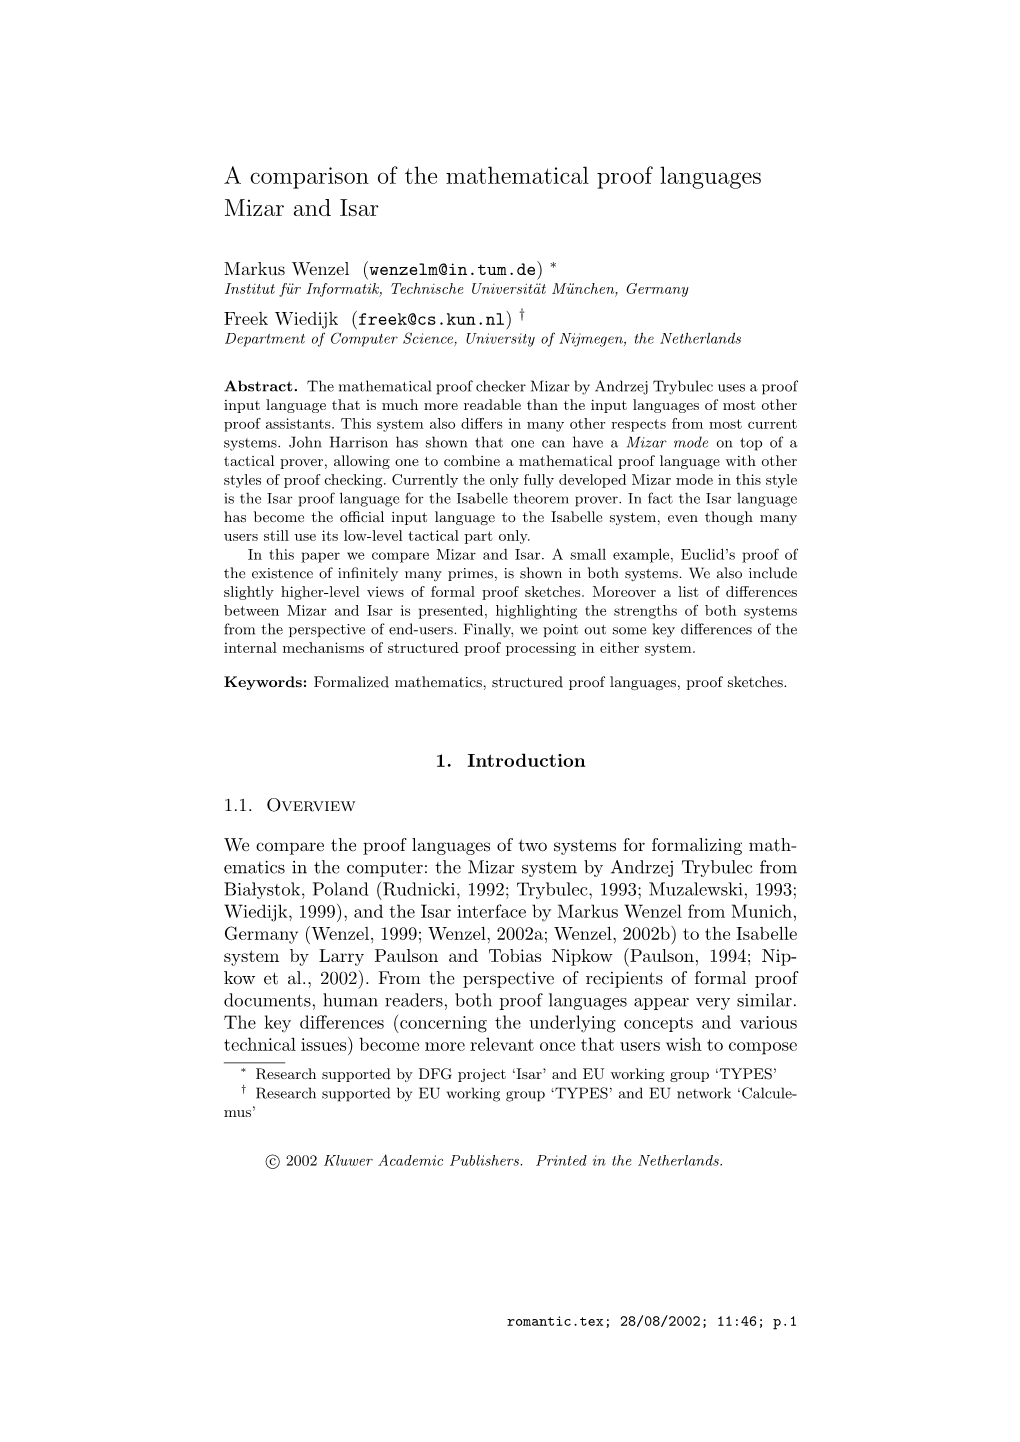 A Comparison of the Mathematical Proof Languages Mizar and Isar